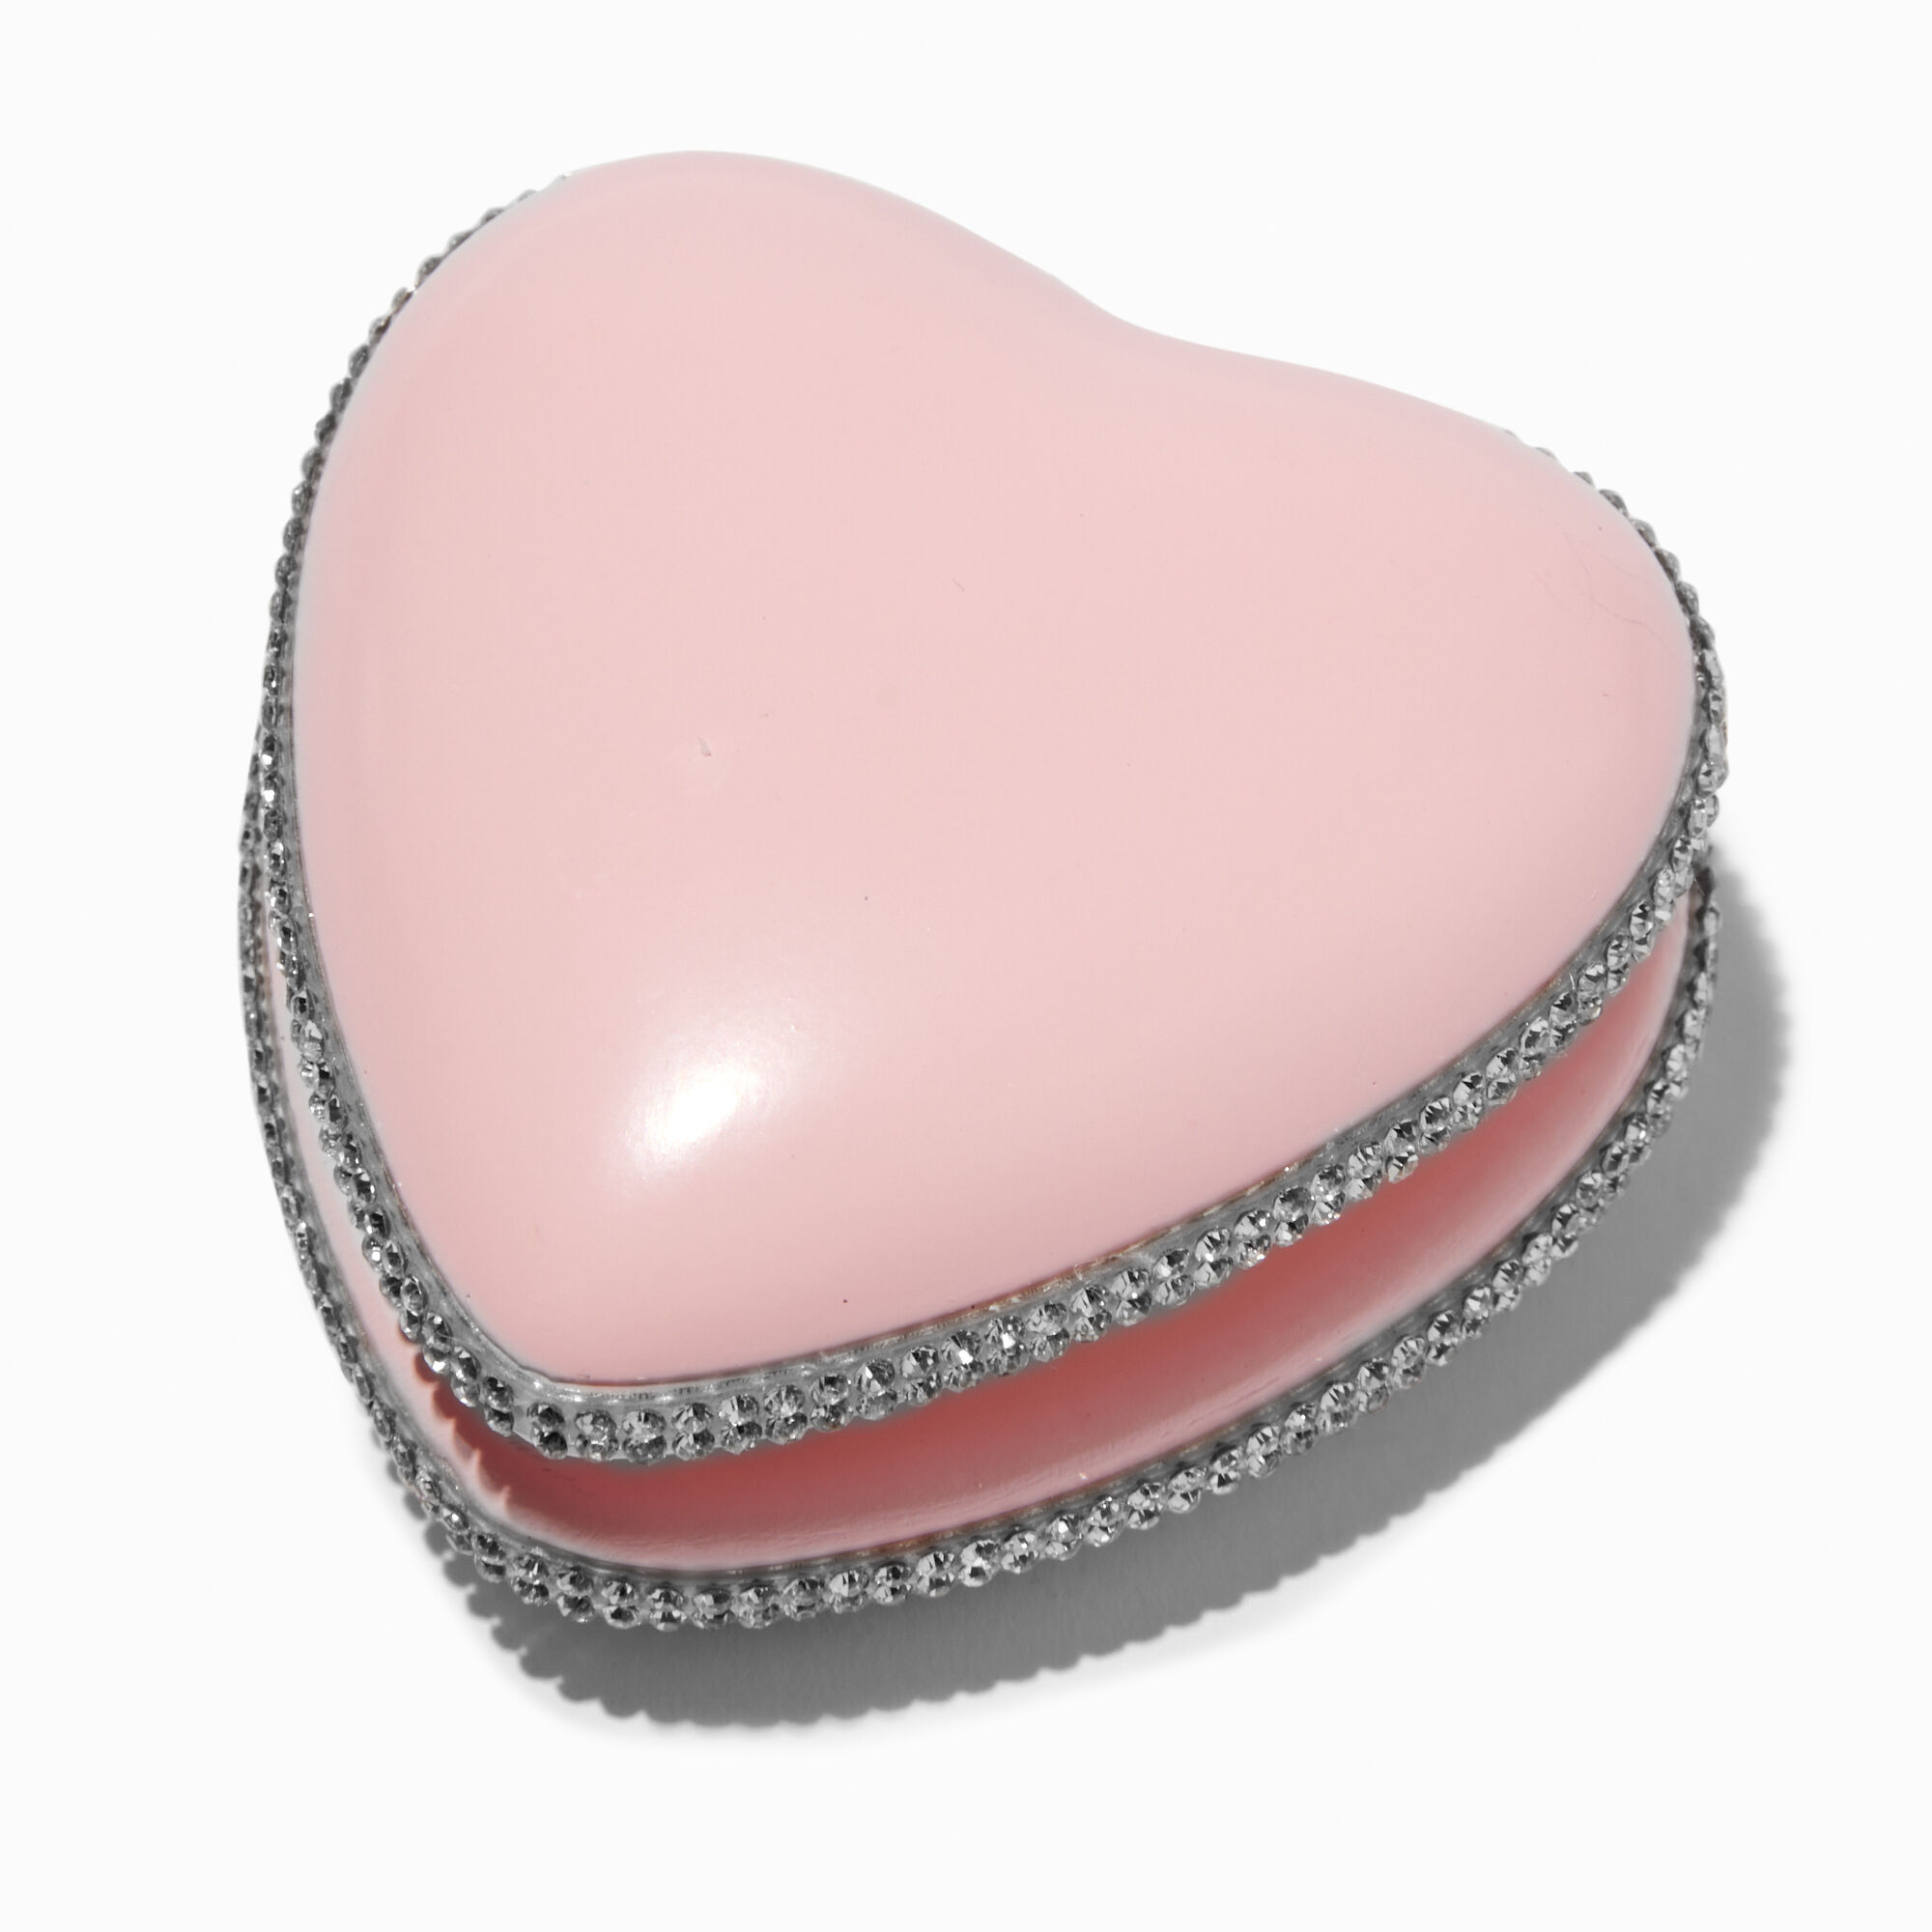 View Claires Bling Heart Jewelry Holder Pink information